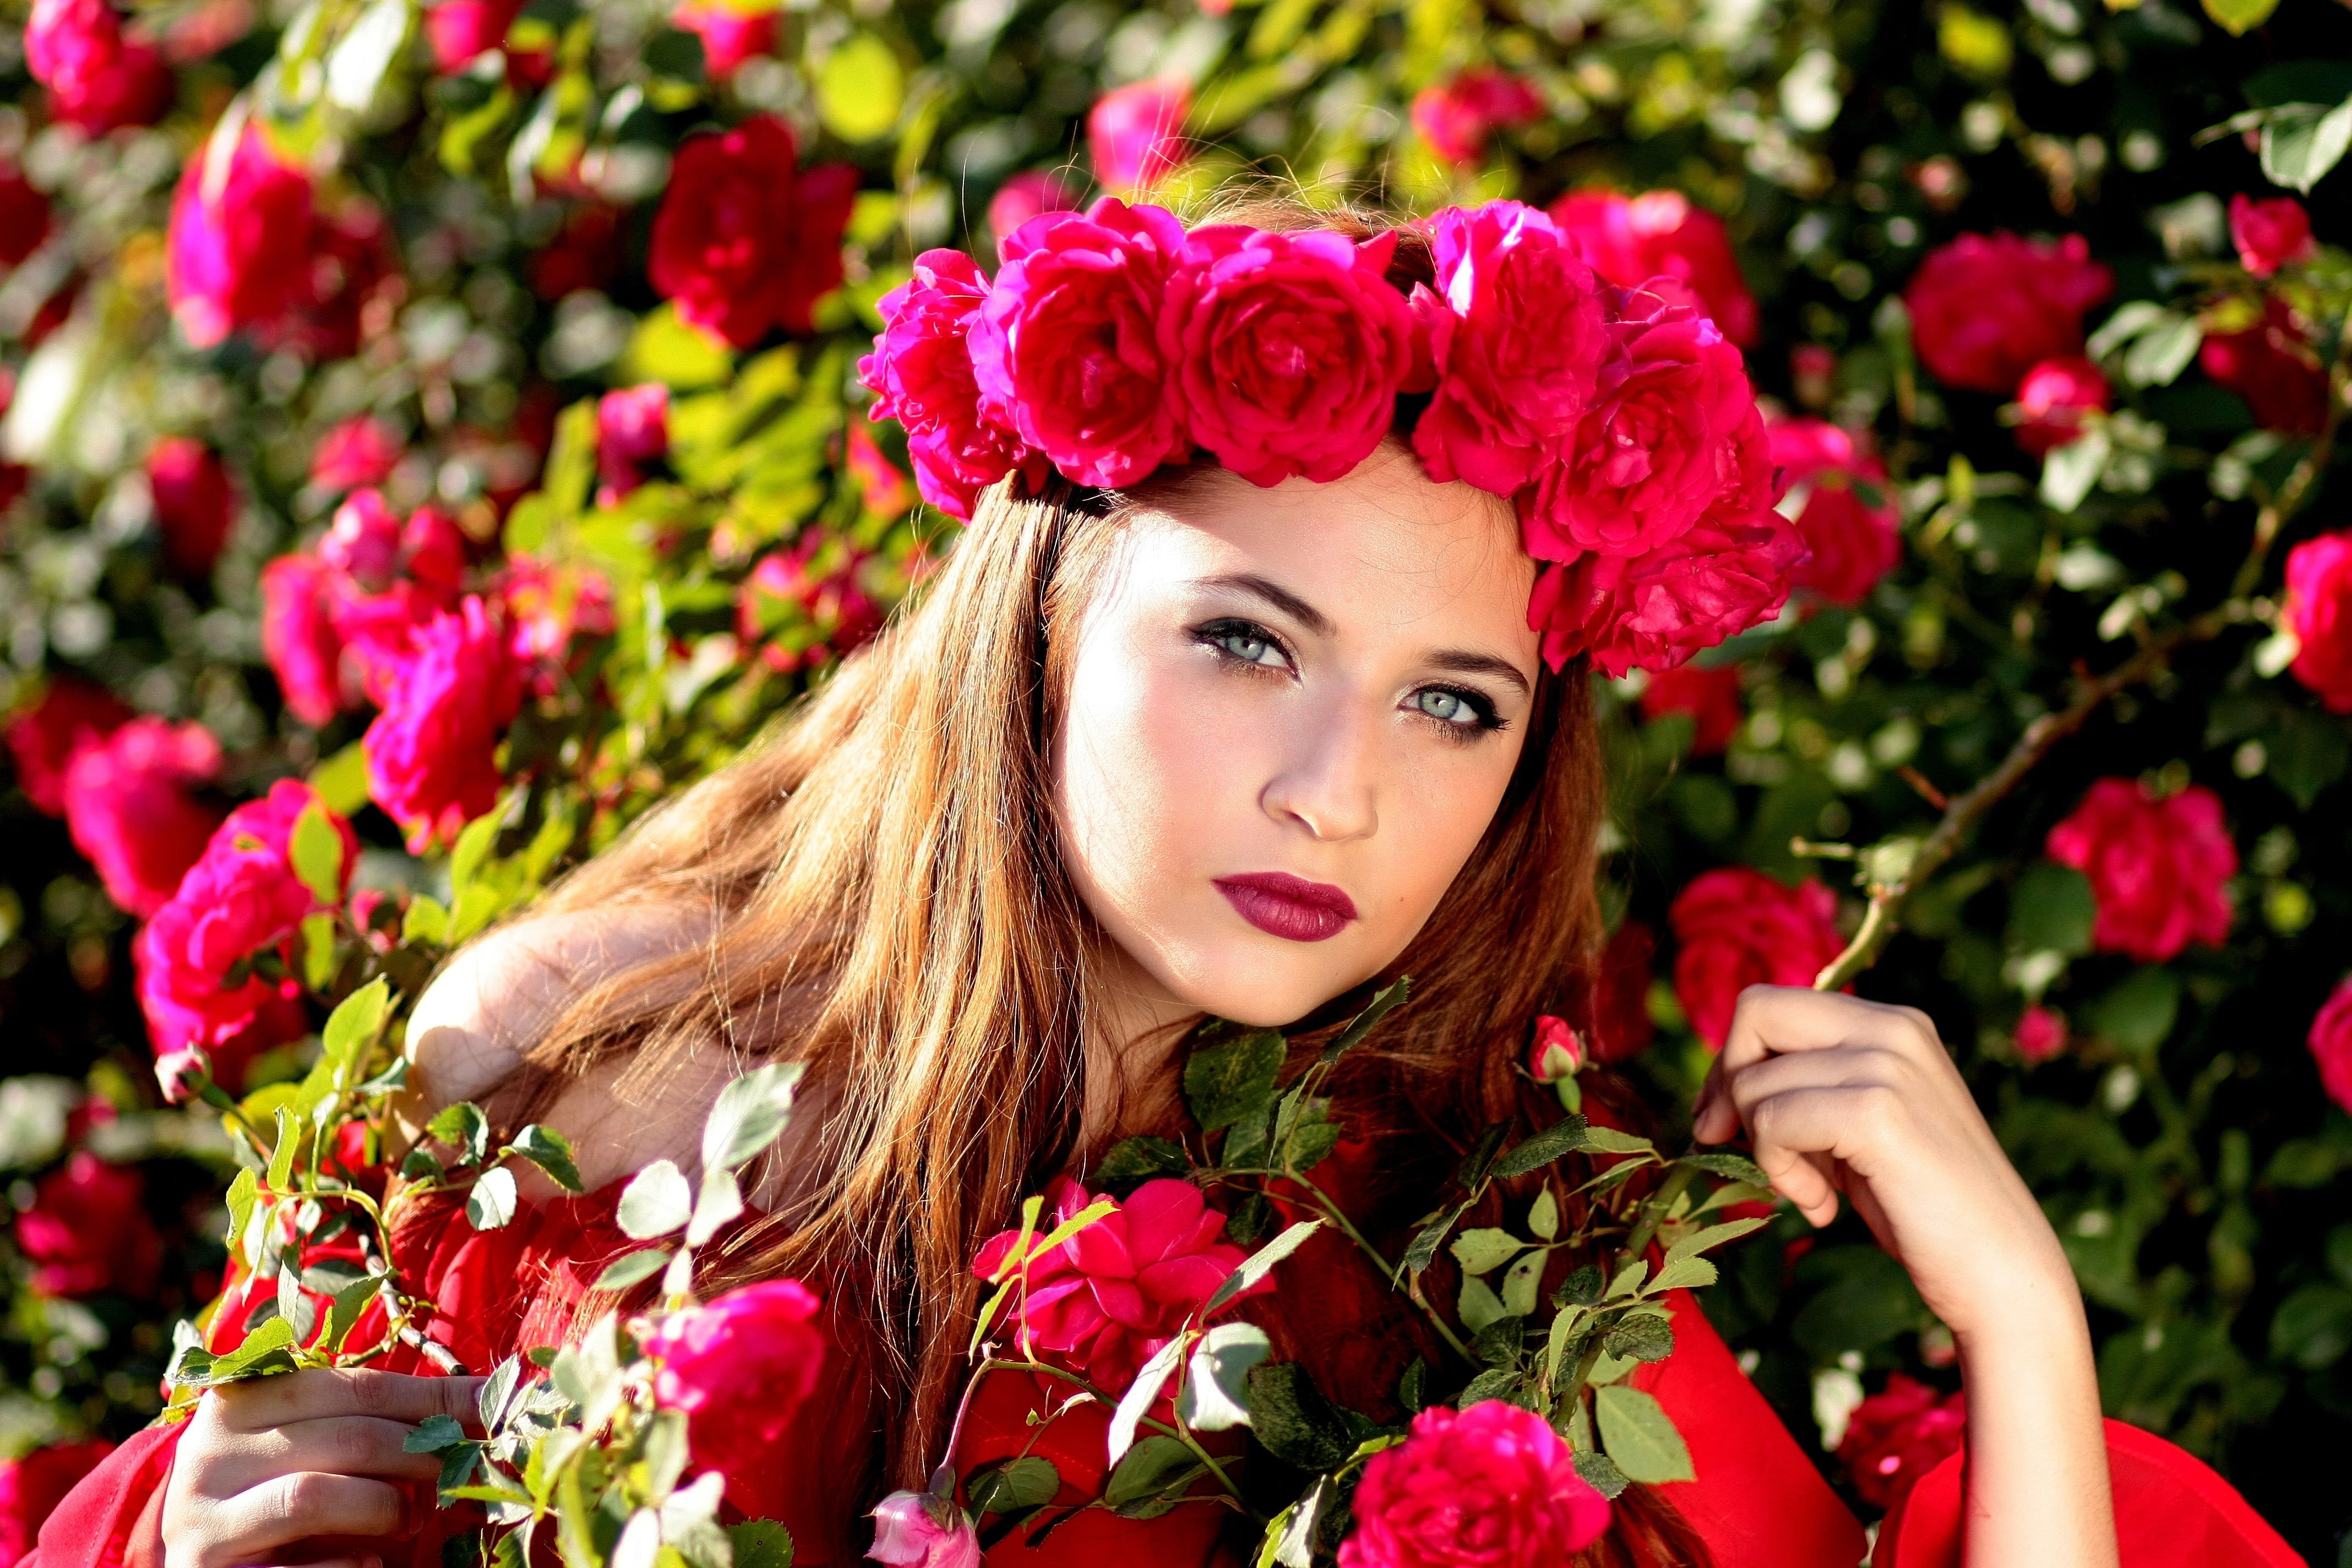 Woman wearing red Rose headband posing in red Rose garden patch HD